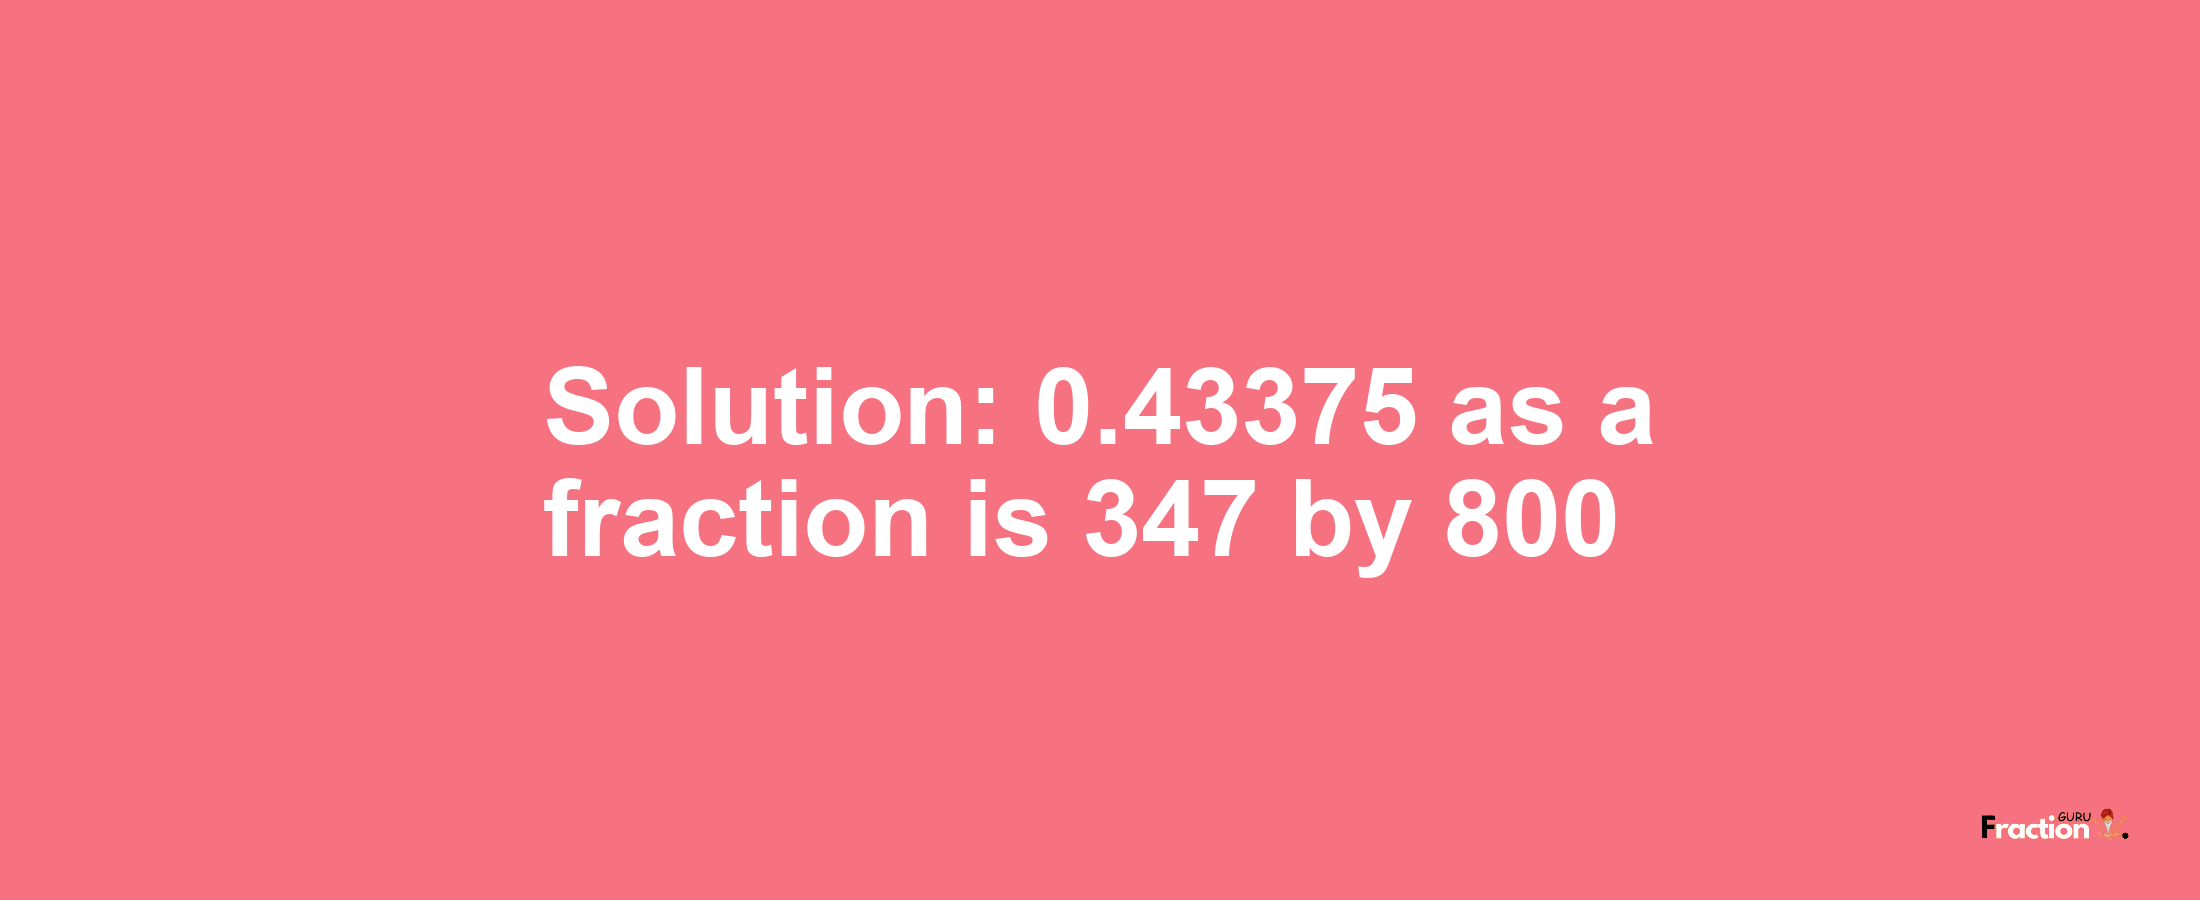 Solution:0.43375 as a fraction is 347/800